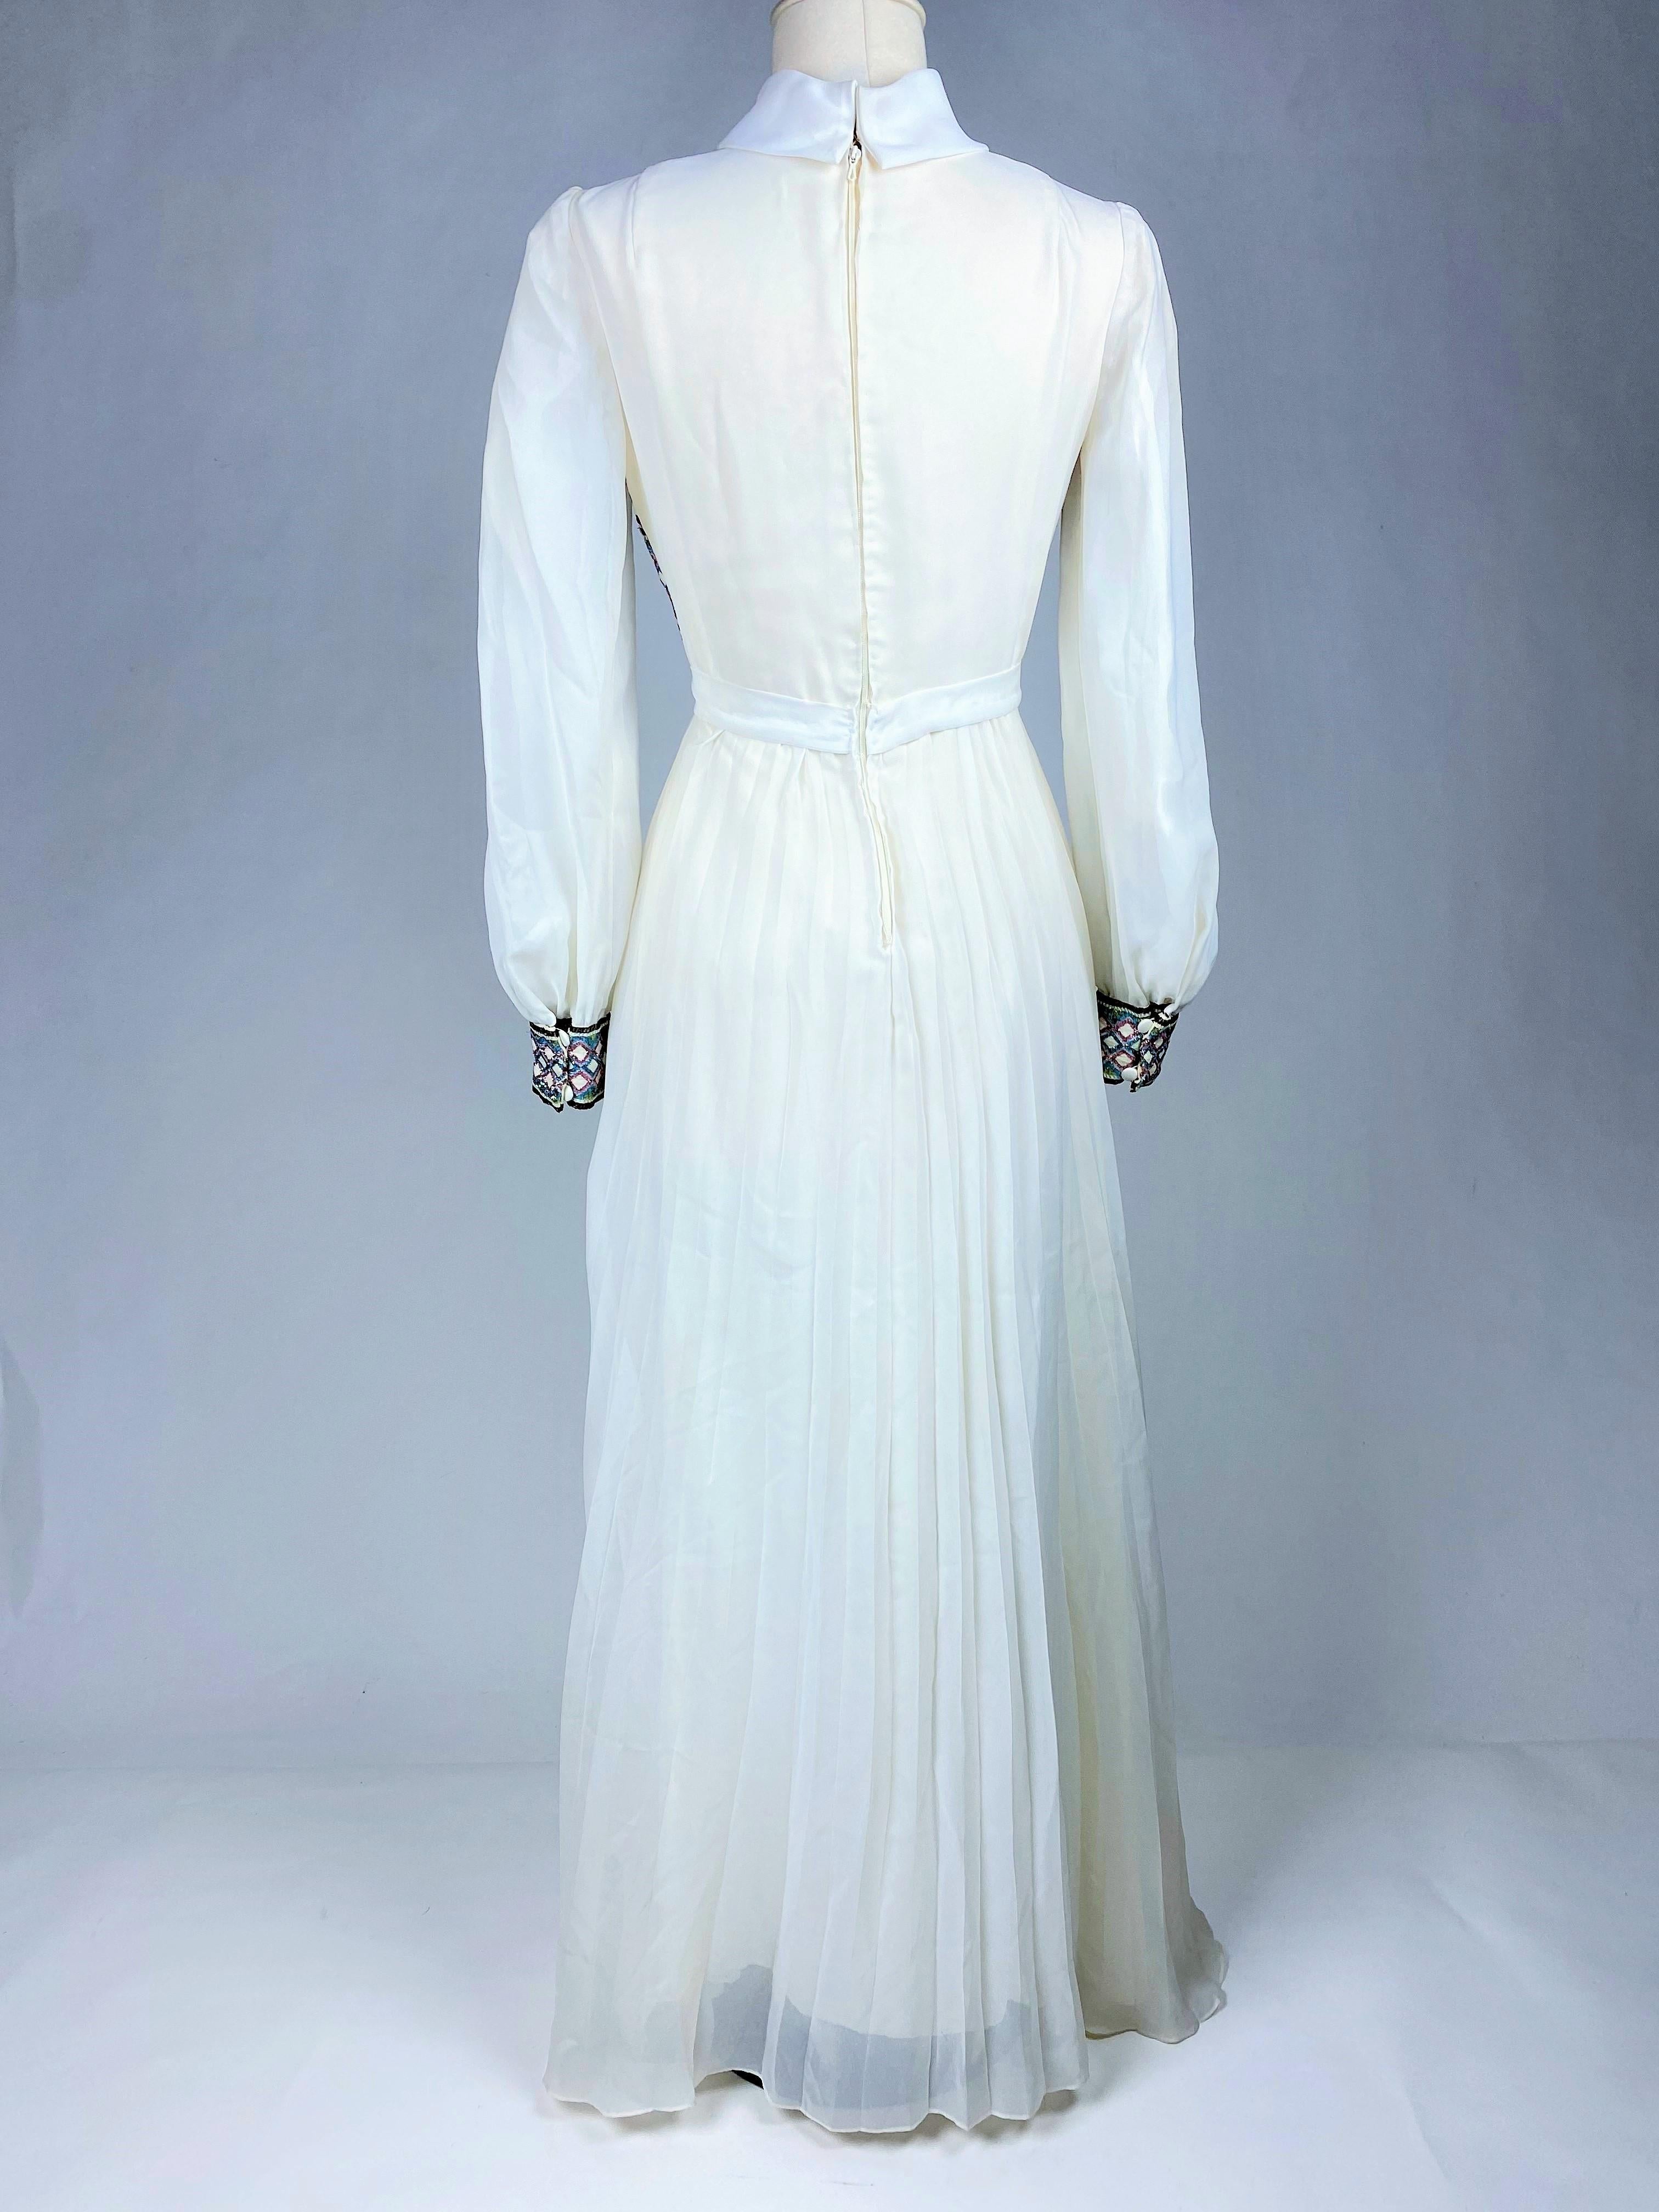 Nylon and lurex crepe formal dress - France Circa 1972 For Sale 5